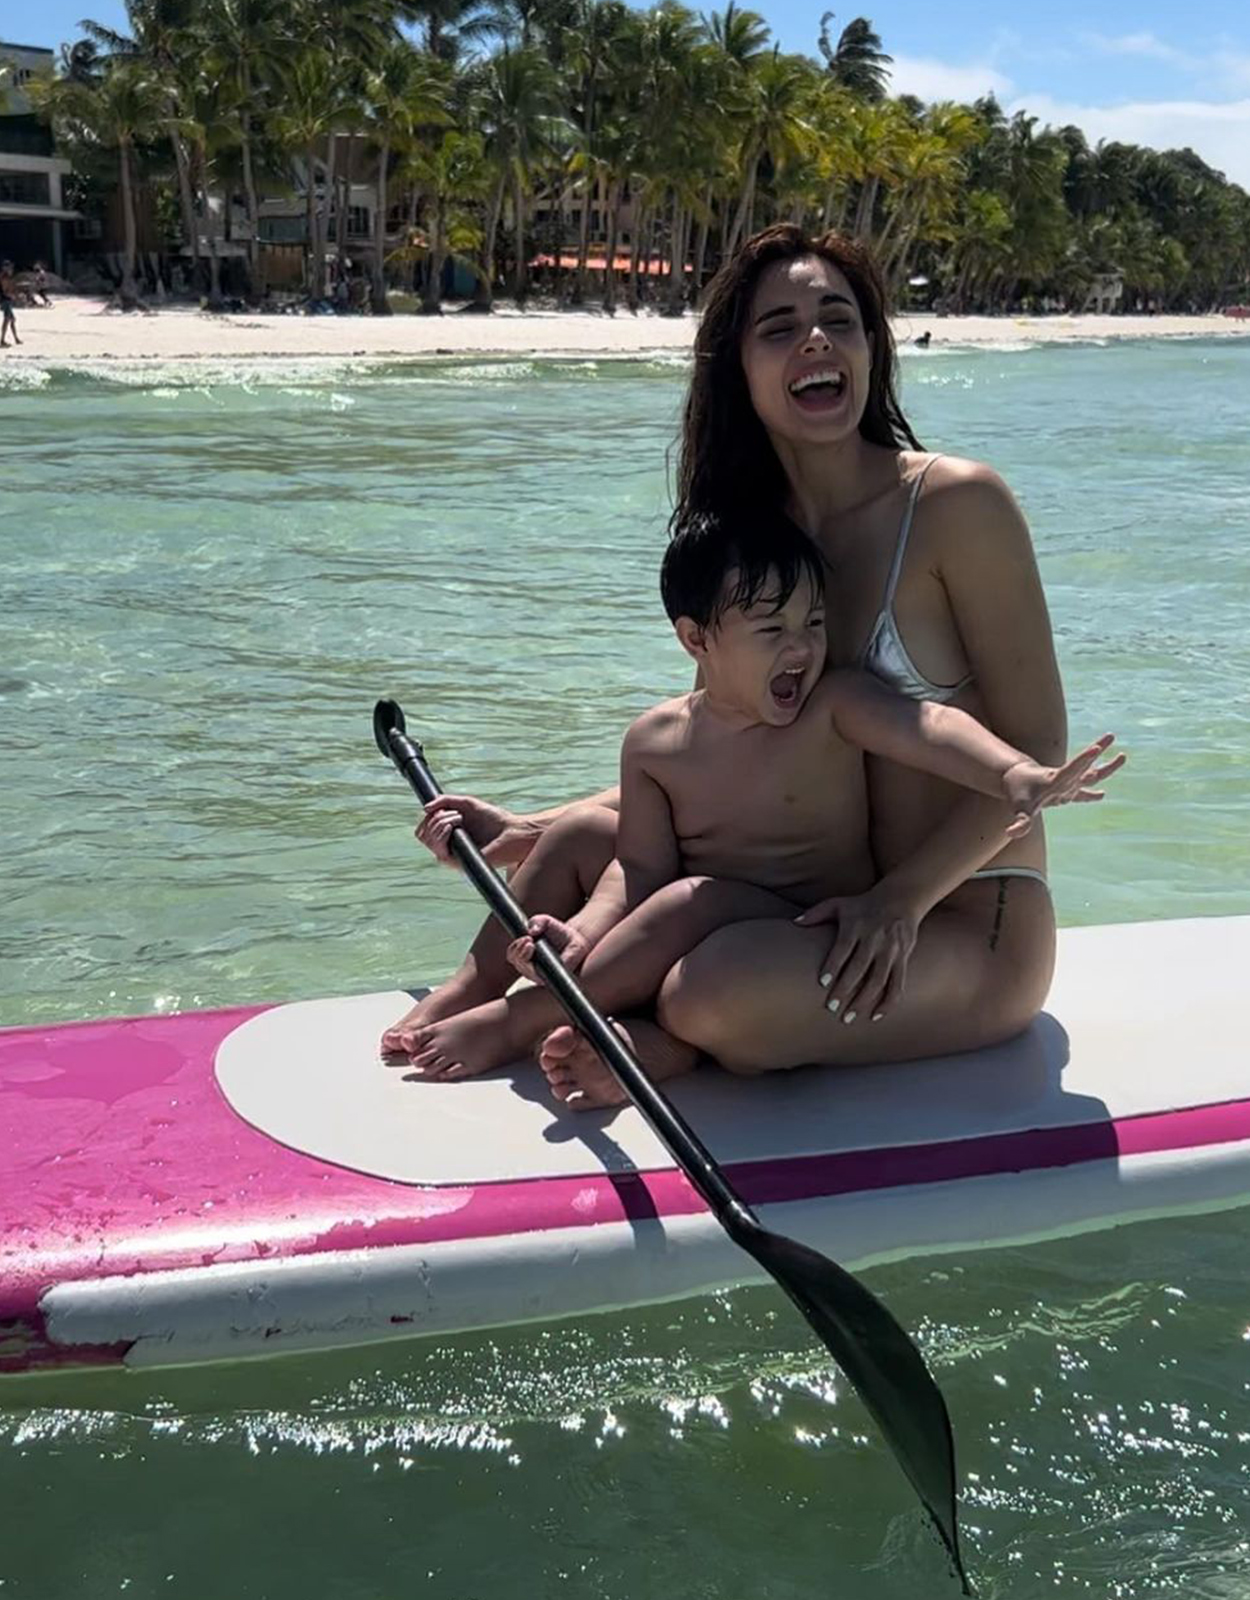 Max Collins is co-parenting her son Skye